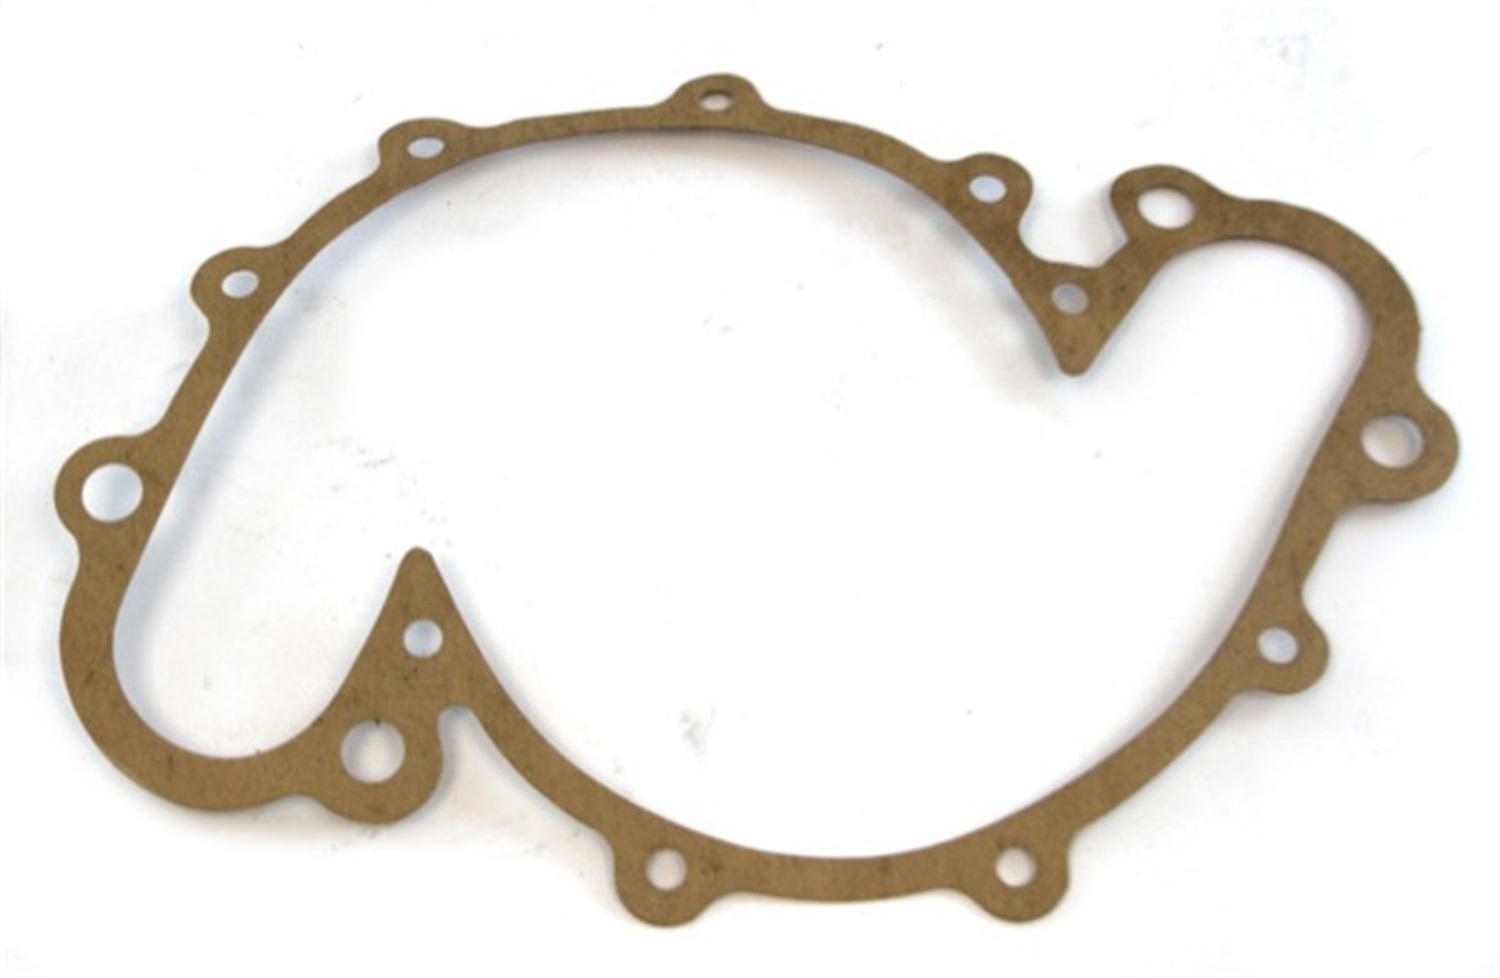 Omix This Water Pump Gasket From Omix Fits 72-81 Jeep Cj5, 76-81 Cj7, And 1981 Cj8 With A 304 Cubic